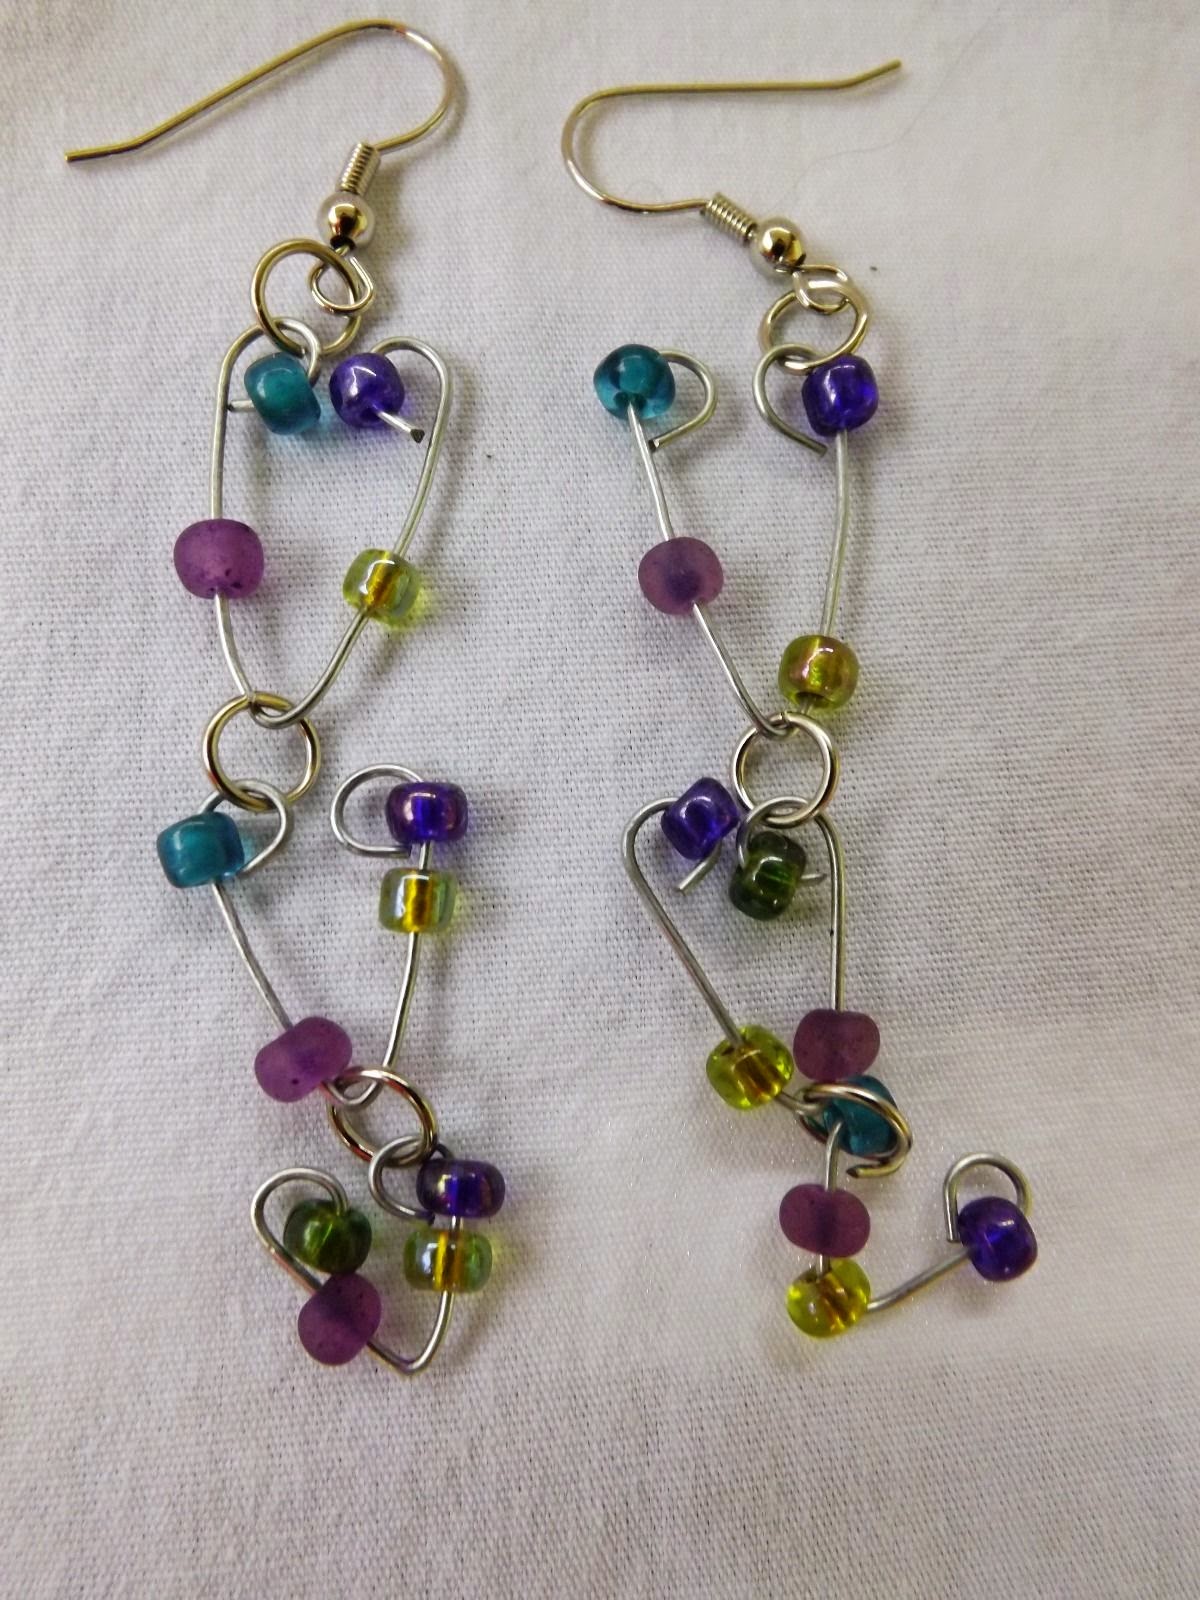 http://www.ebay.com/itm/Decending-Heart-Earrings-Handmade-glass-dangle-with-stainless-steel-hook-/261770352940?fb_action_ids=318219618366541&fb_action_types=og.shares&fb_source=other_multiline&action_object_map=%5B857778784264377%5D&action_type_map=%5B%22og.shares%22%5D&action_ref_map=%5B%5D